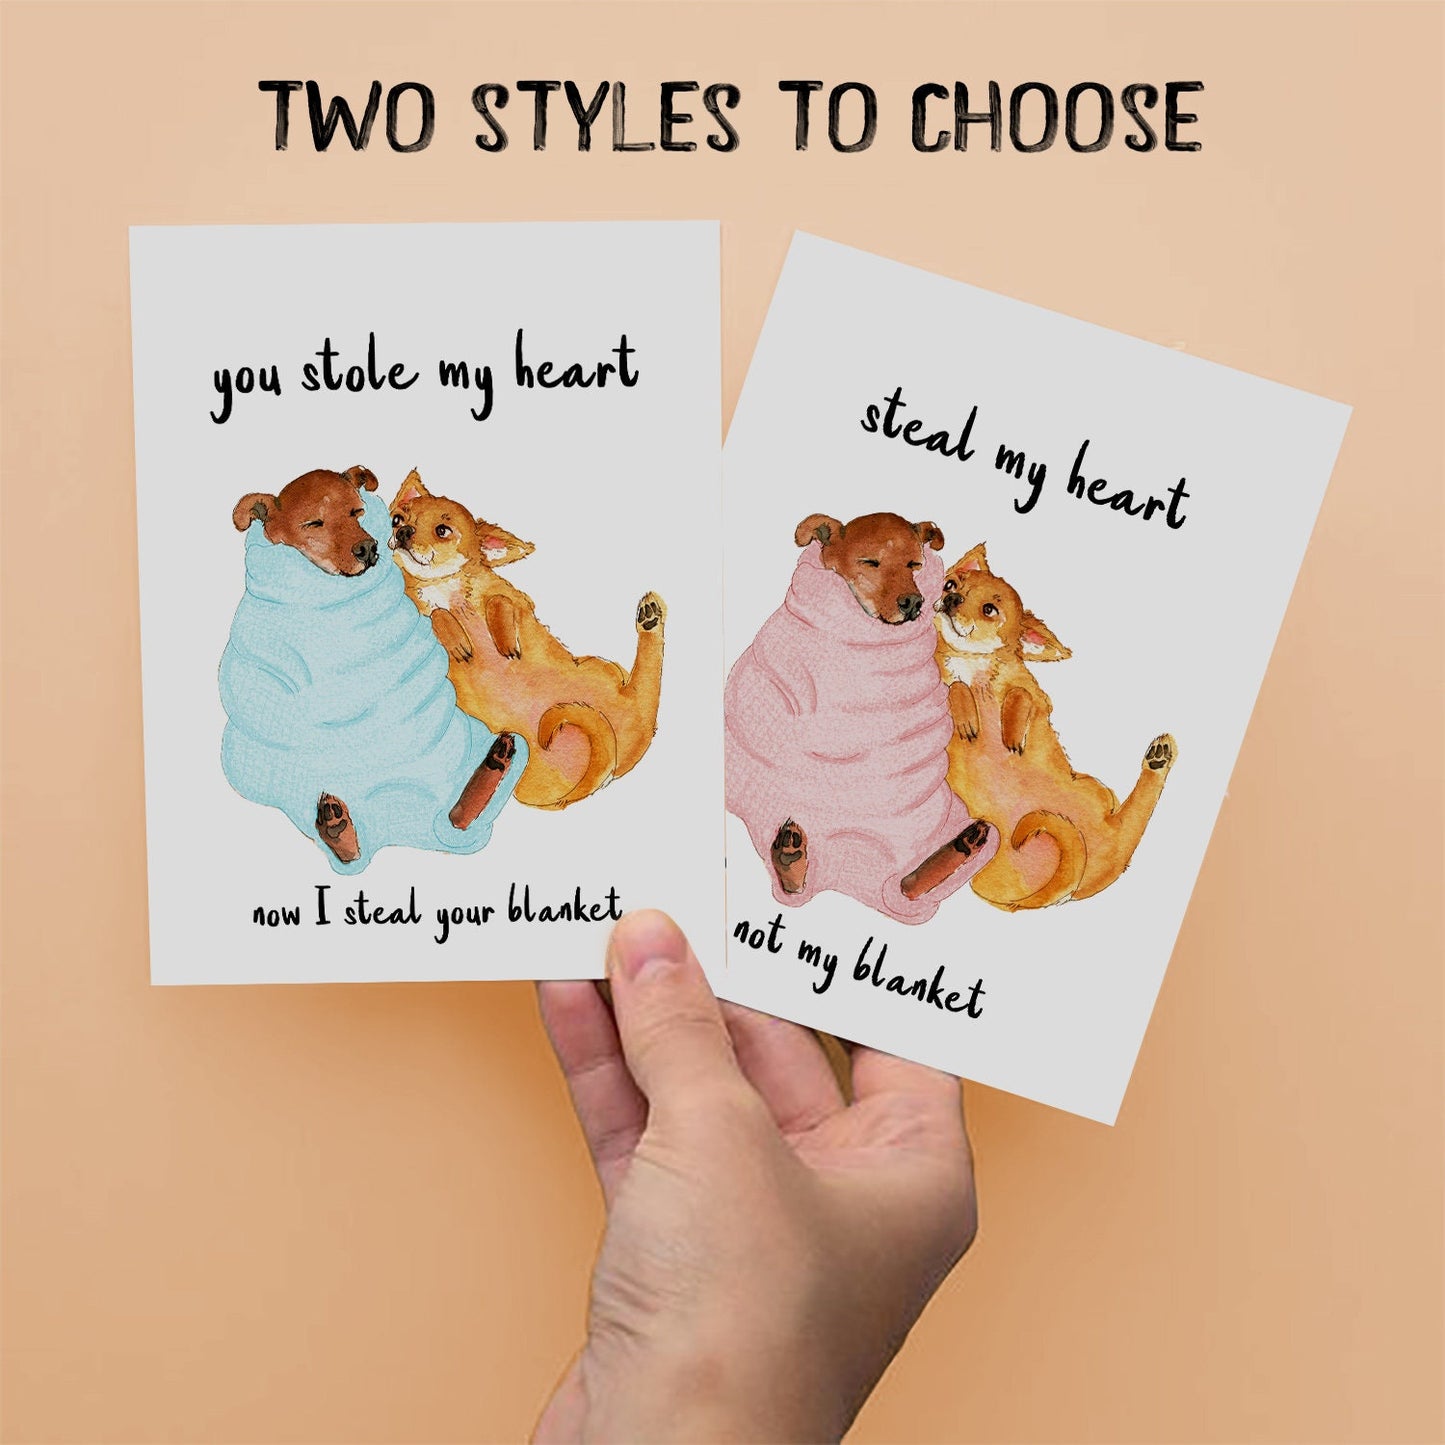 Blanket Thief Funny Anniversary Card For Boyfriend - Funny Valentines Day Card For Girlfriend - Dog Lover Valentines Gift